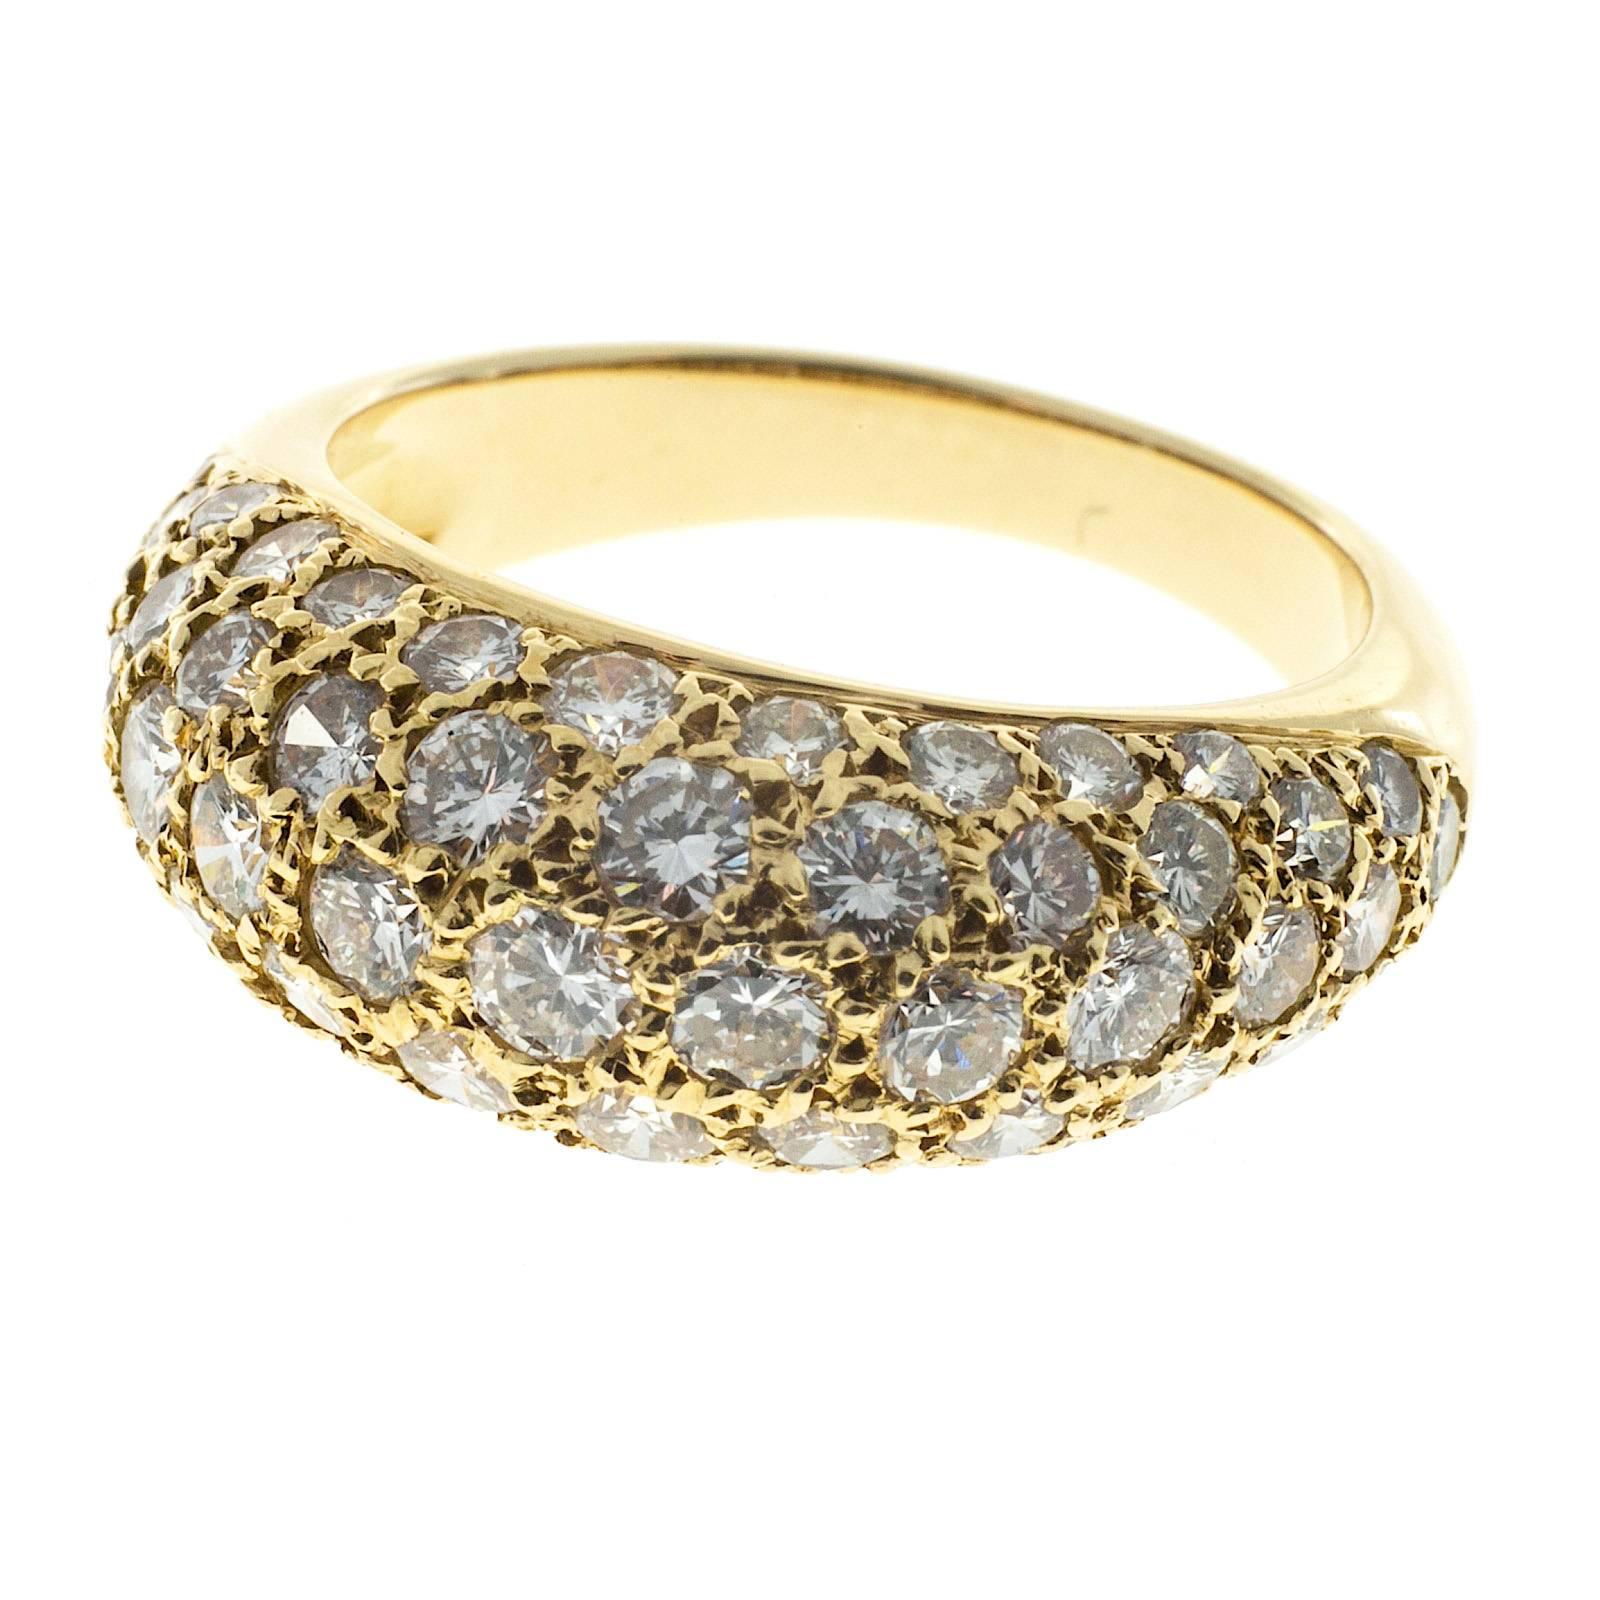 Pave diamond dome ring with excellent sparkly full cut diamonds.

57 full cut diamonds, approx. total weight 1.00cts, G, VS
18k Yellow Gold
Tested: 18k
European hallmarks
5.4 grams
Width at top: 8mm
Height at top: 4.5mm
Width at bottom: 3mm
Size 5